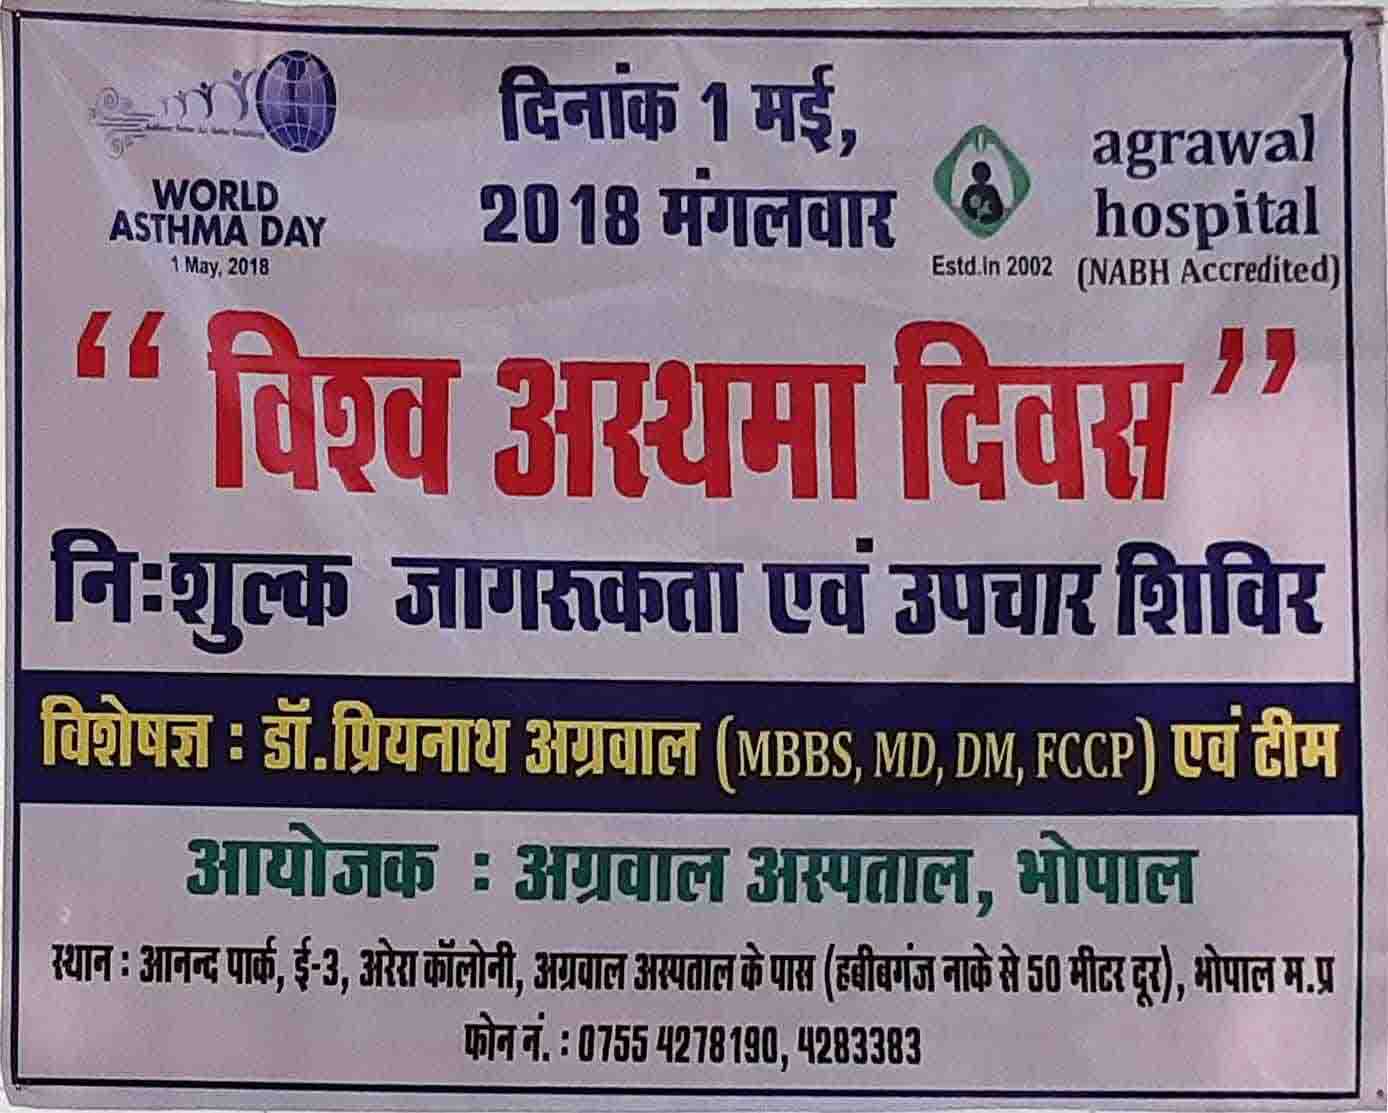 Agrawal Hospital Events